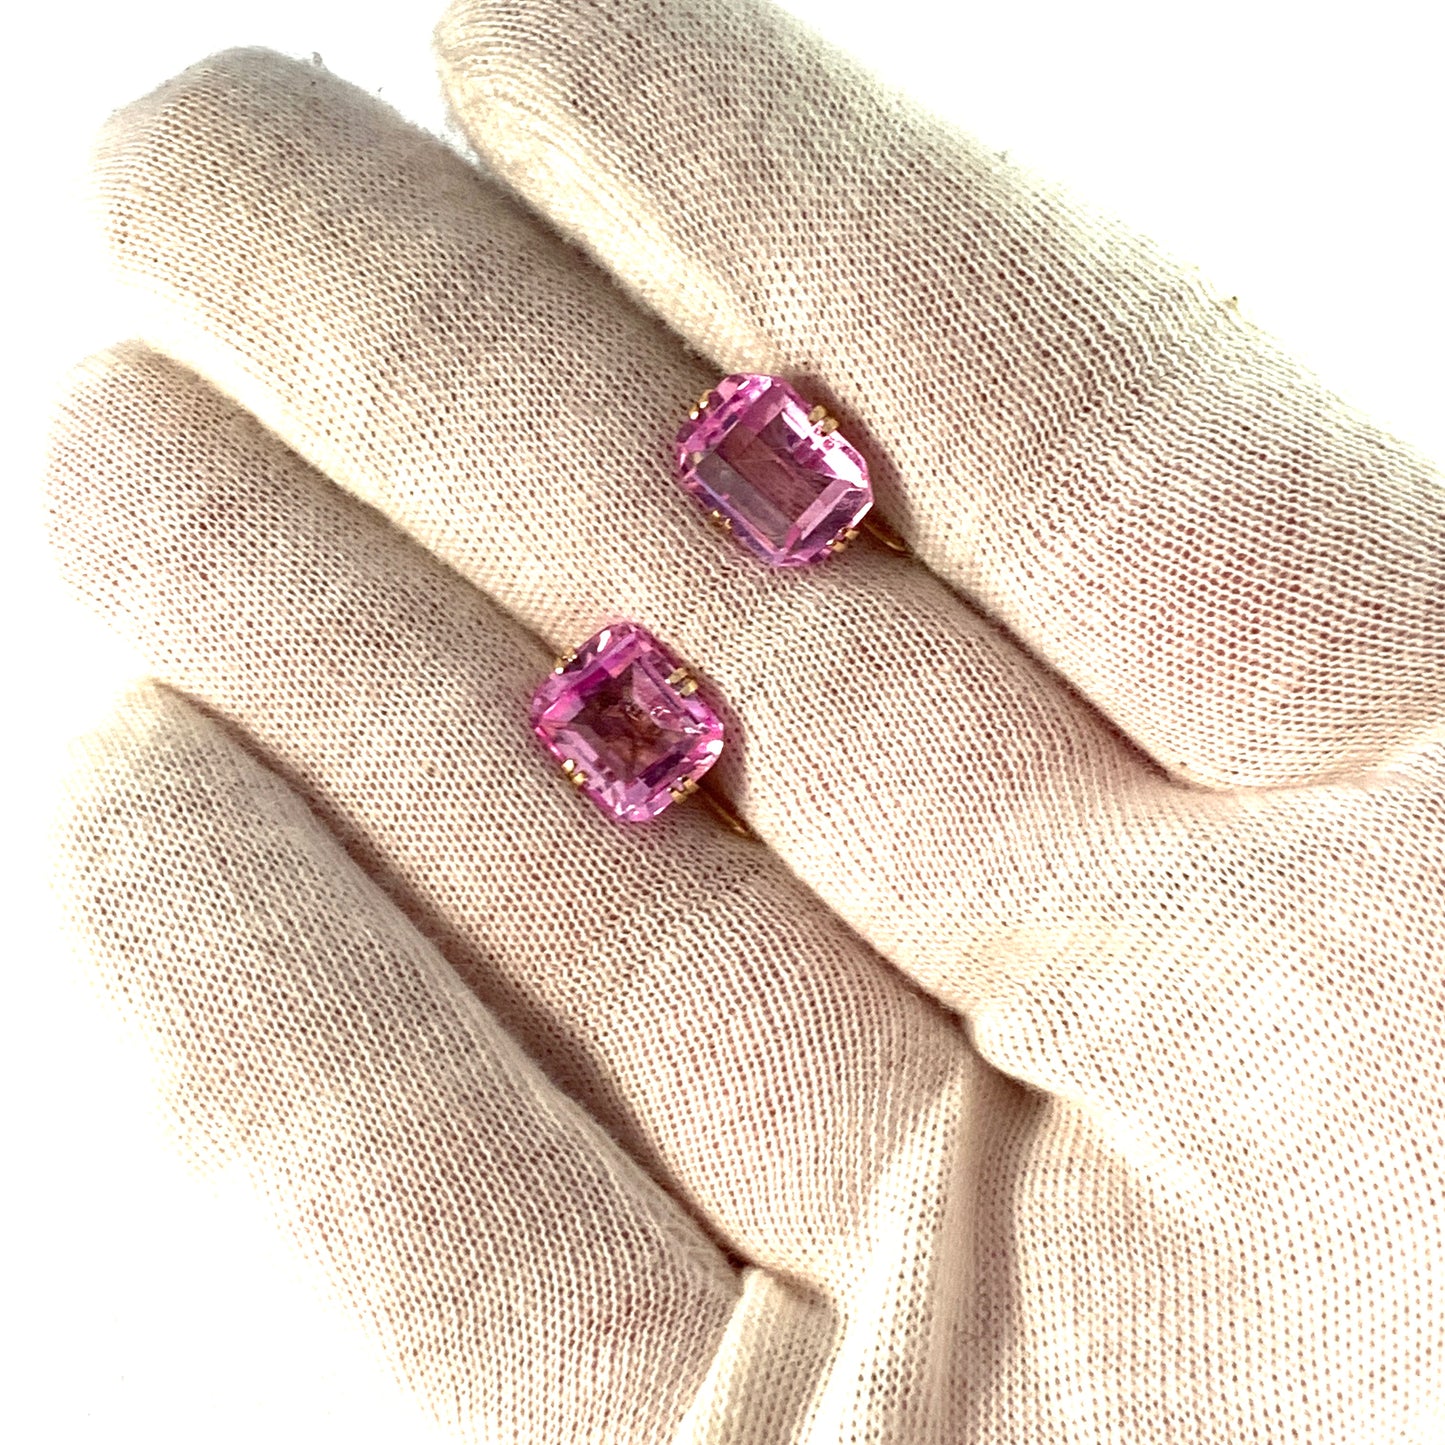 Vintage Mid Century 14k Gold Pink Synthetic Sapphire Earrings.